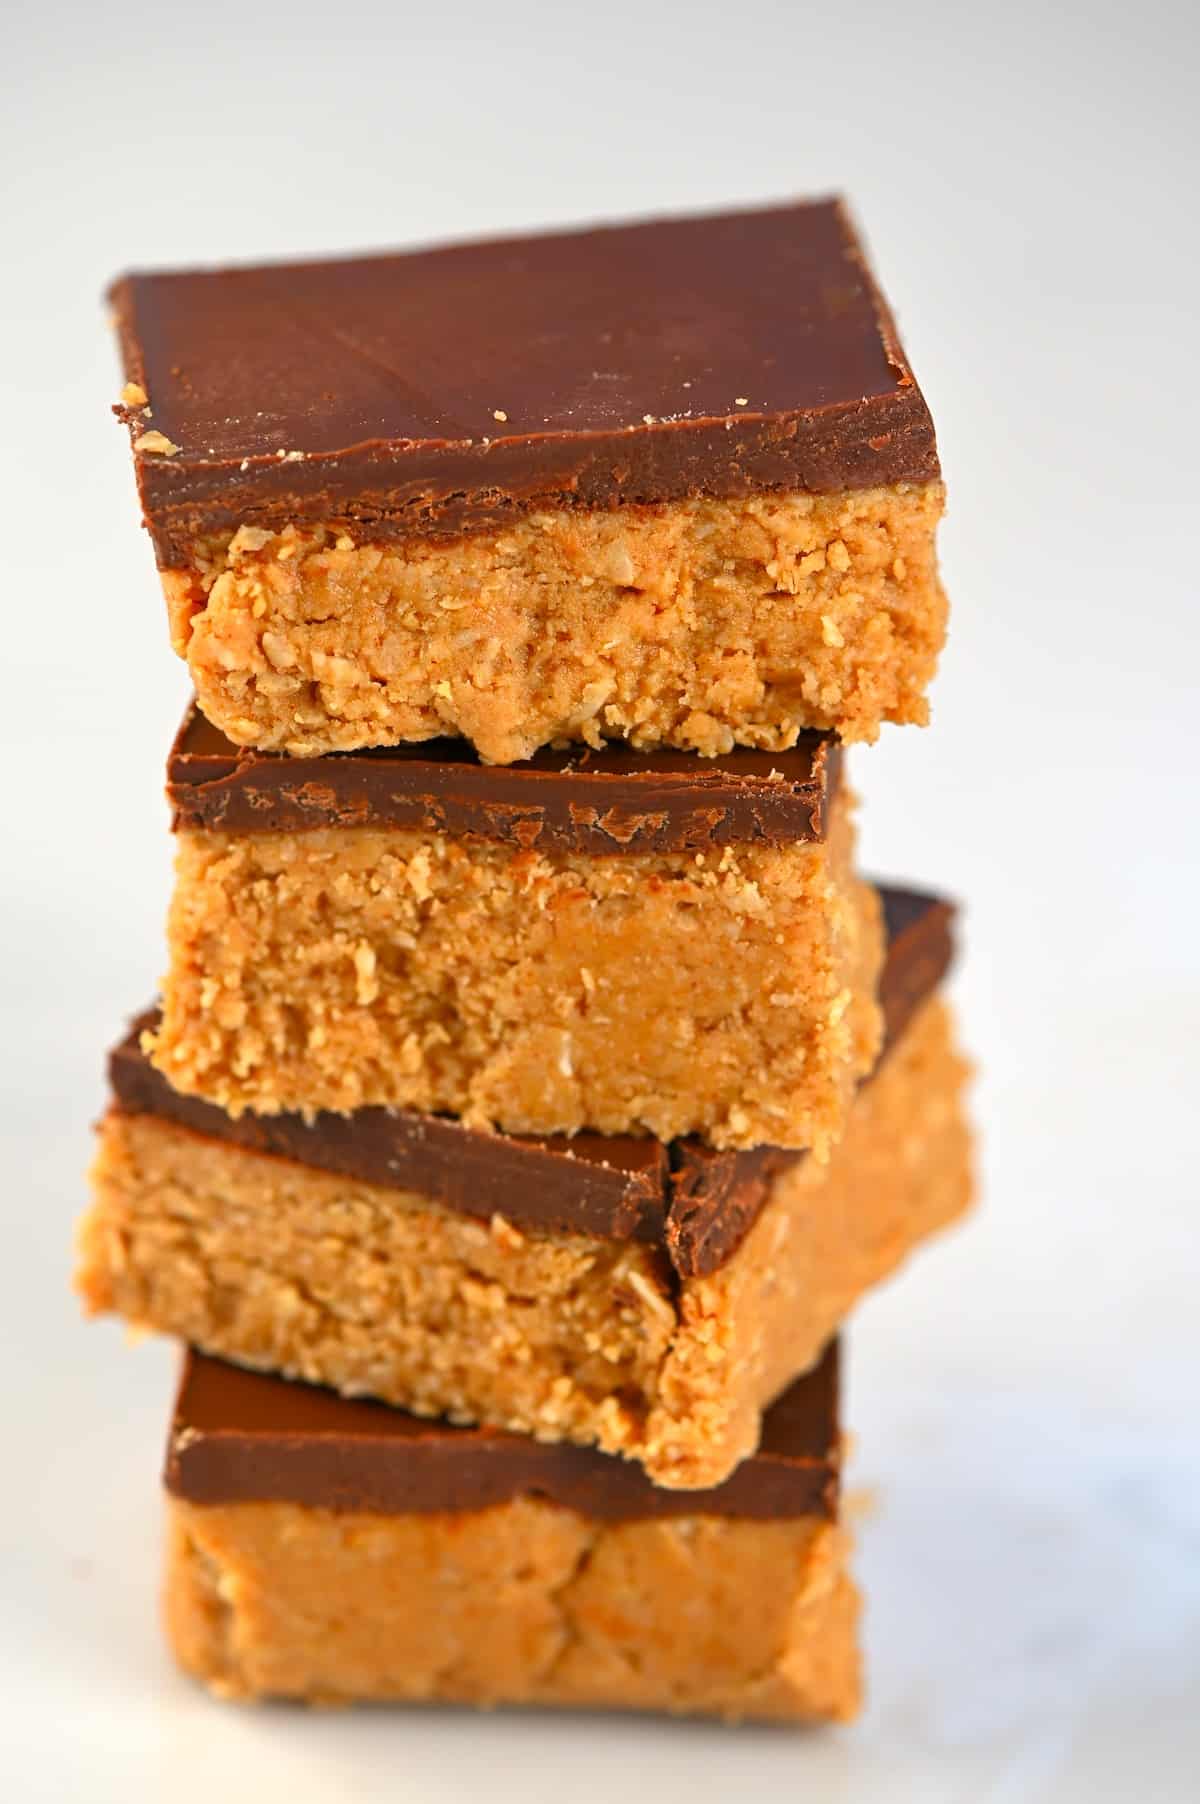 Four peanut butter bars with chocolate coating stacked on top of each other